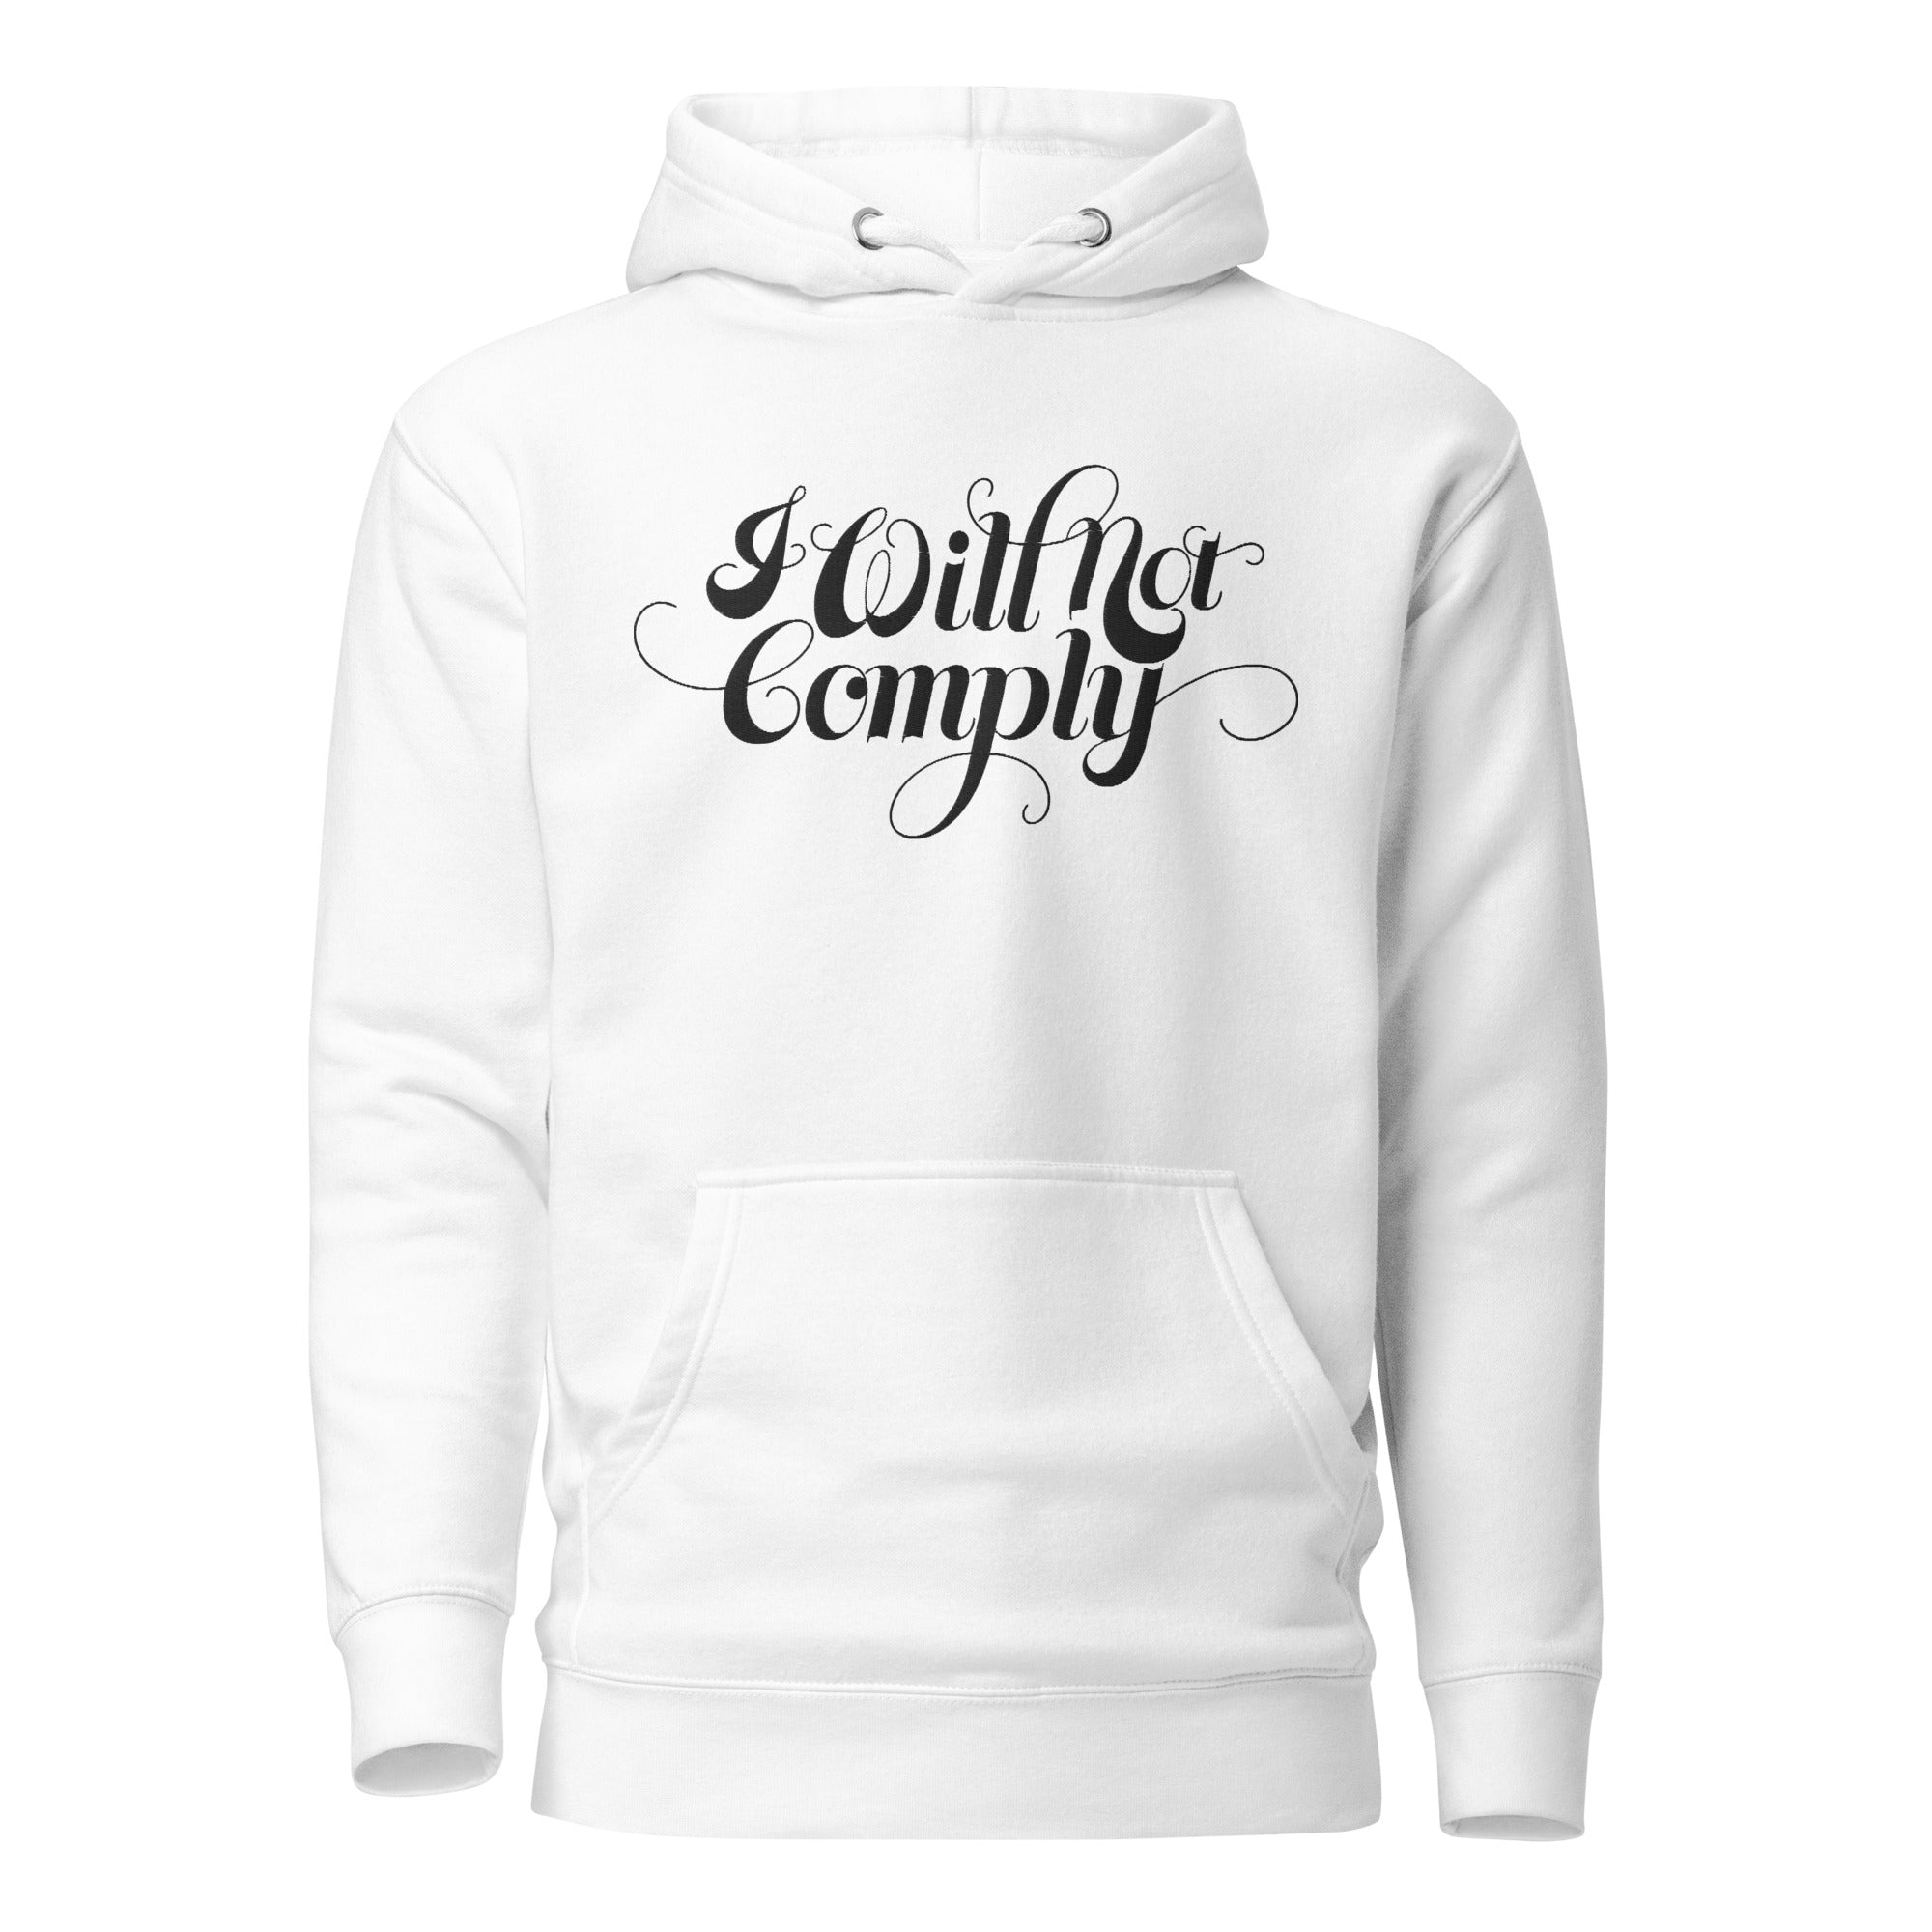 I Will Not Comply Embroidered Unisex Hoodie